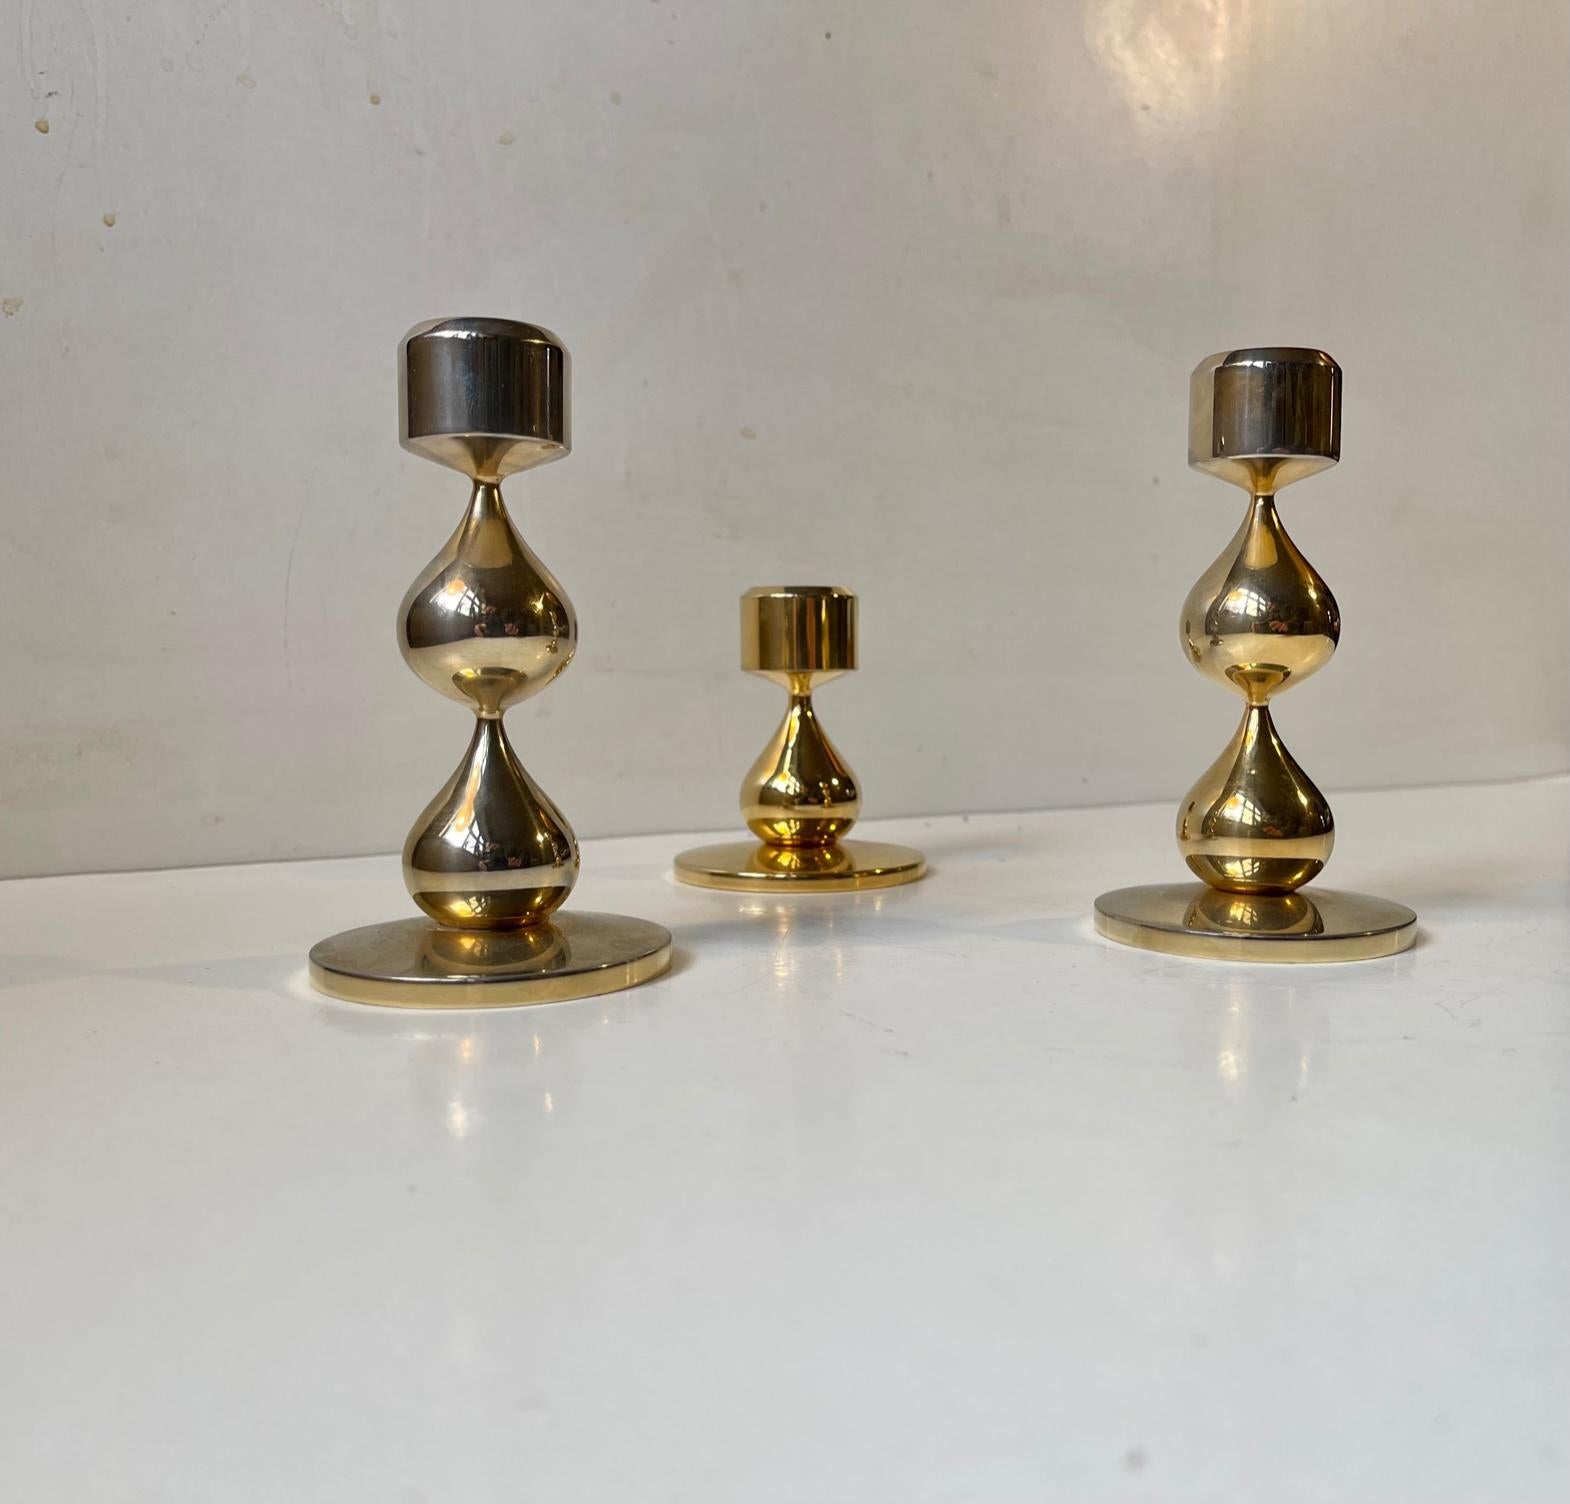 A set of 3 teardrop shaped candlesticks with respectively 1 and two teardrops 2+1. These organically shaped beauties are covered in 24-carat gold-plating. Designed by Hugo Asmussen during the 1960s and manufactured by Asmussen in Denmark circa